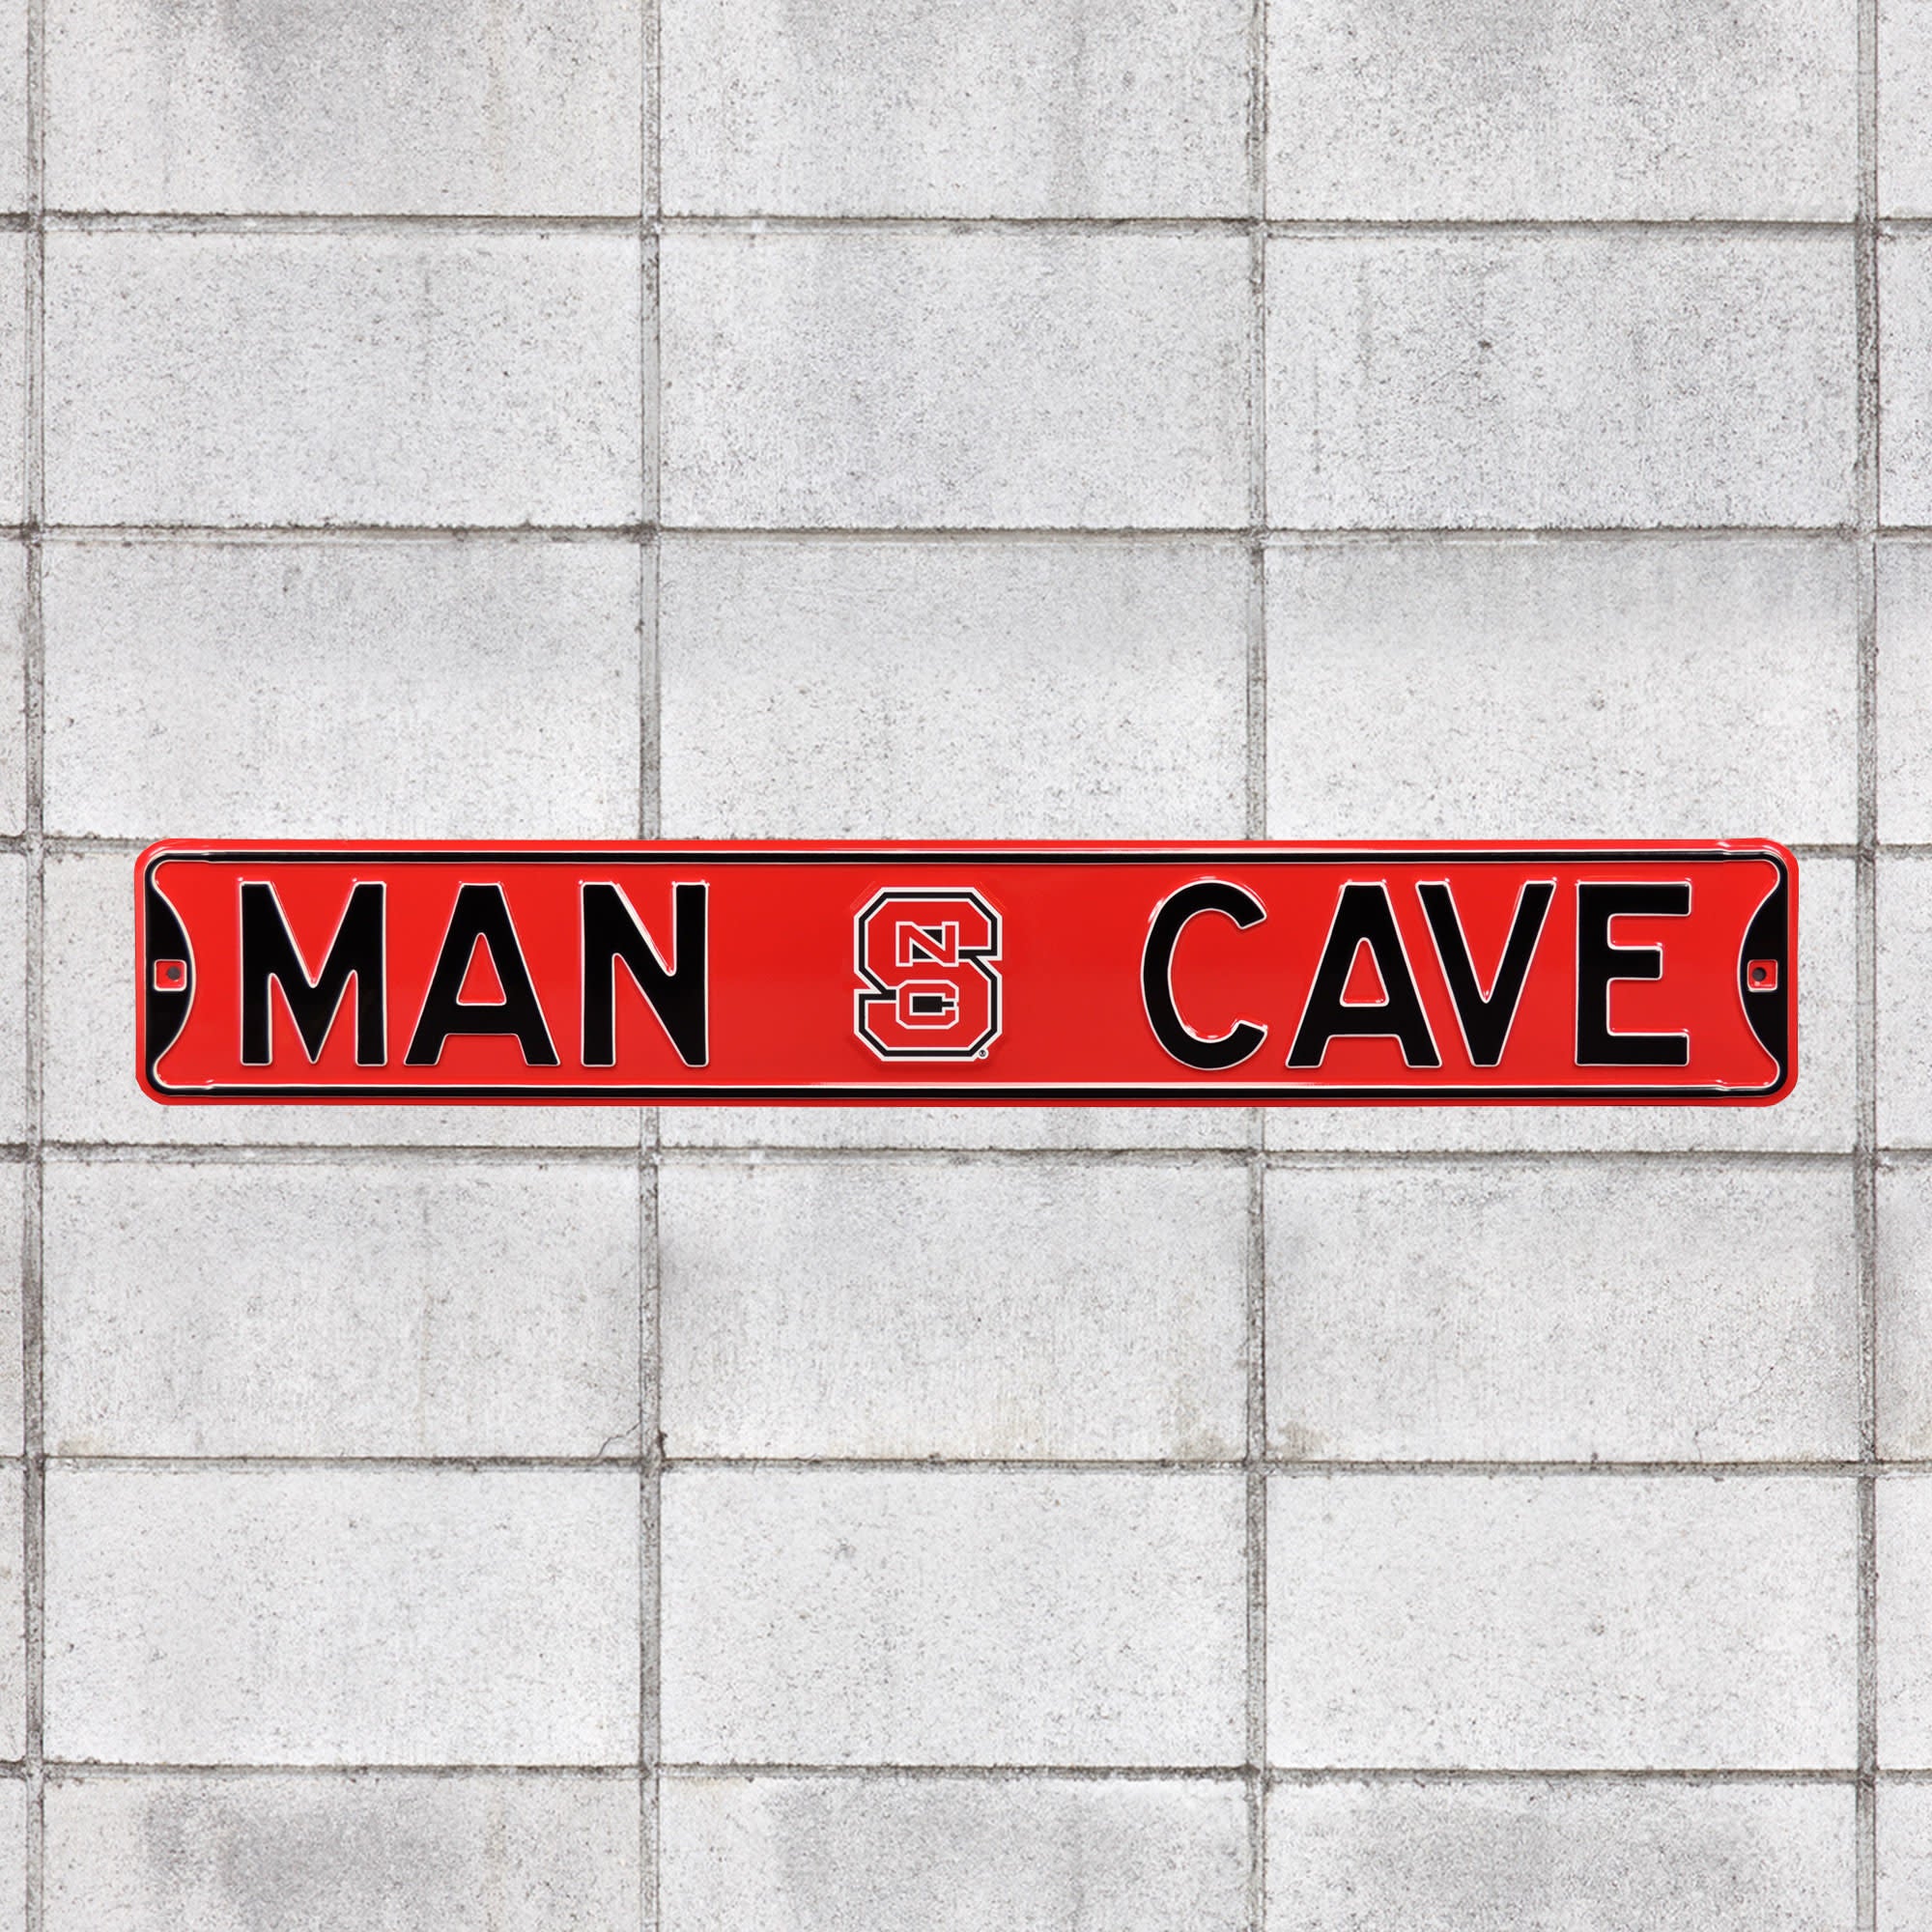 North Carolina State Wolfpack for NC State Wolfpack: Man Cave - Officially Licensed Metal Street Sign by Fathead | 100% Steel